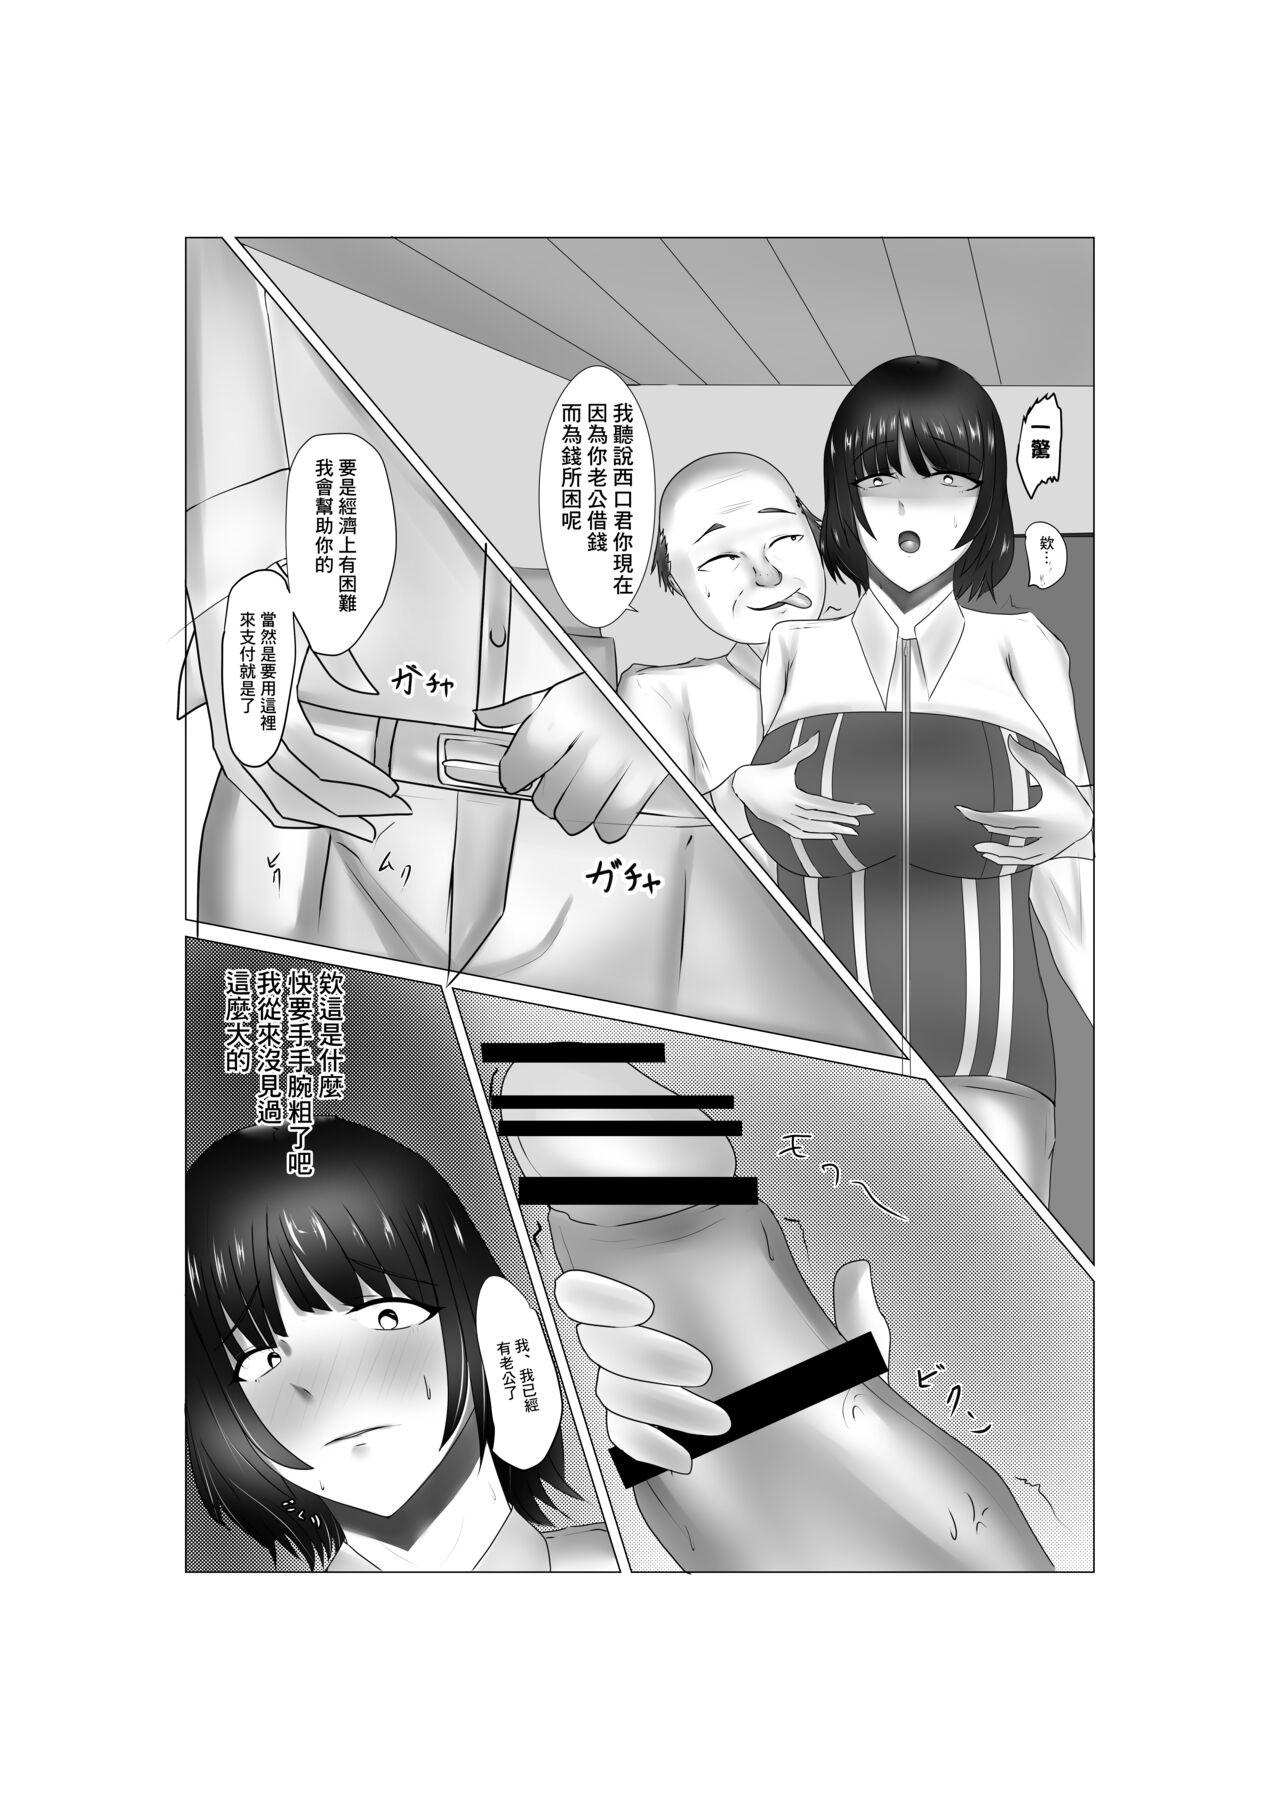 Free Amateur Porn コンビニ奥様の裏の顔 - Original Students - Page 5